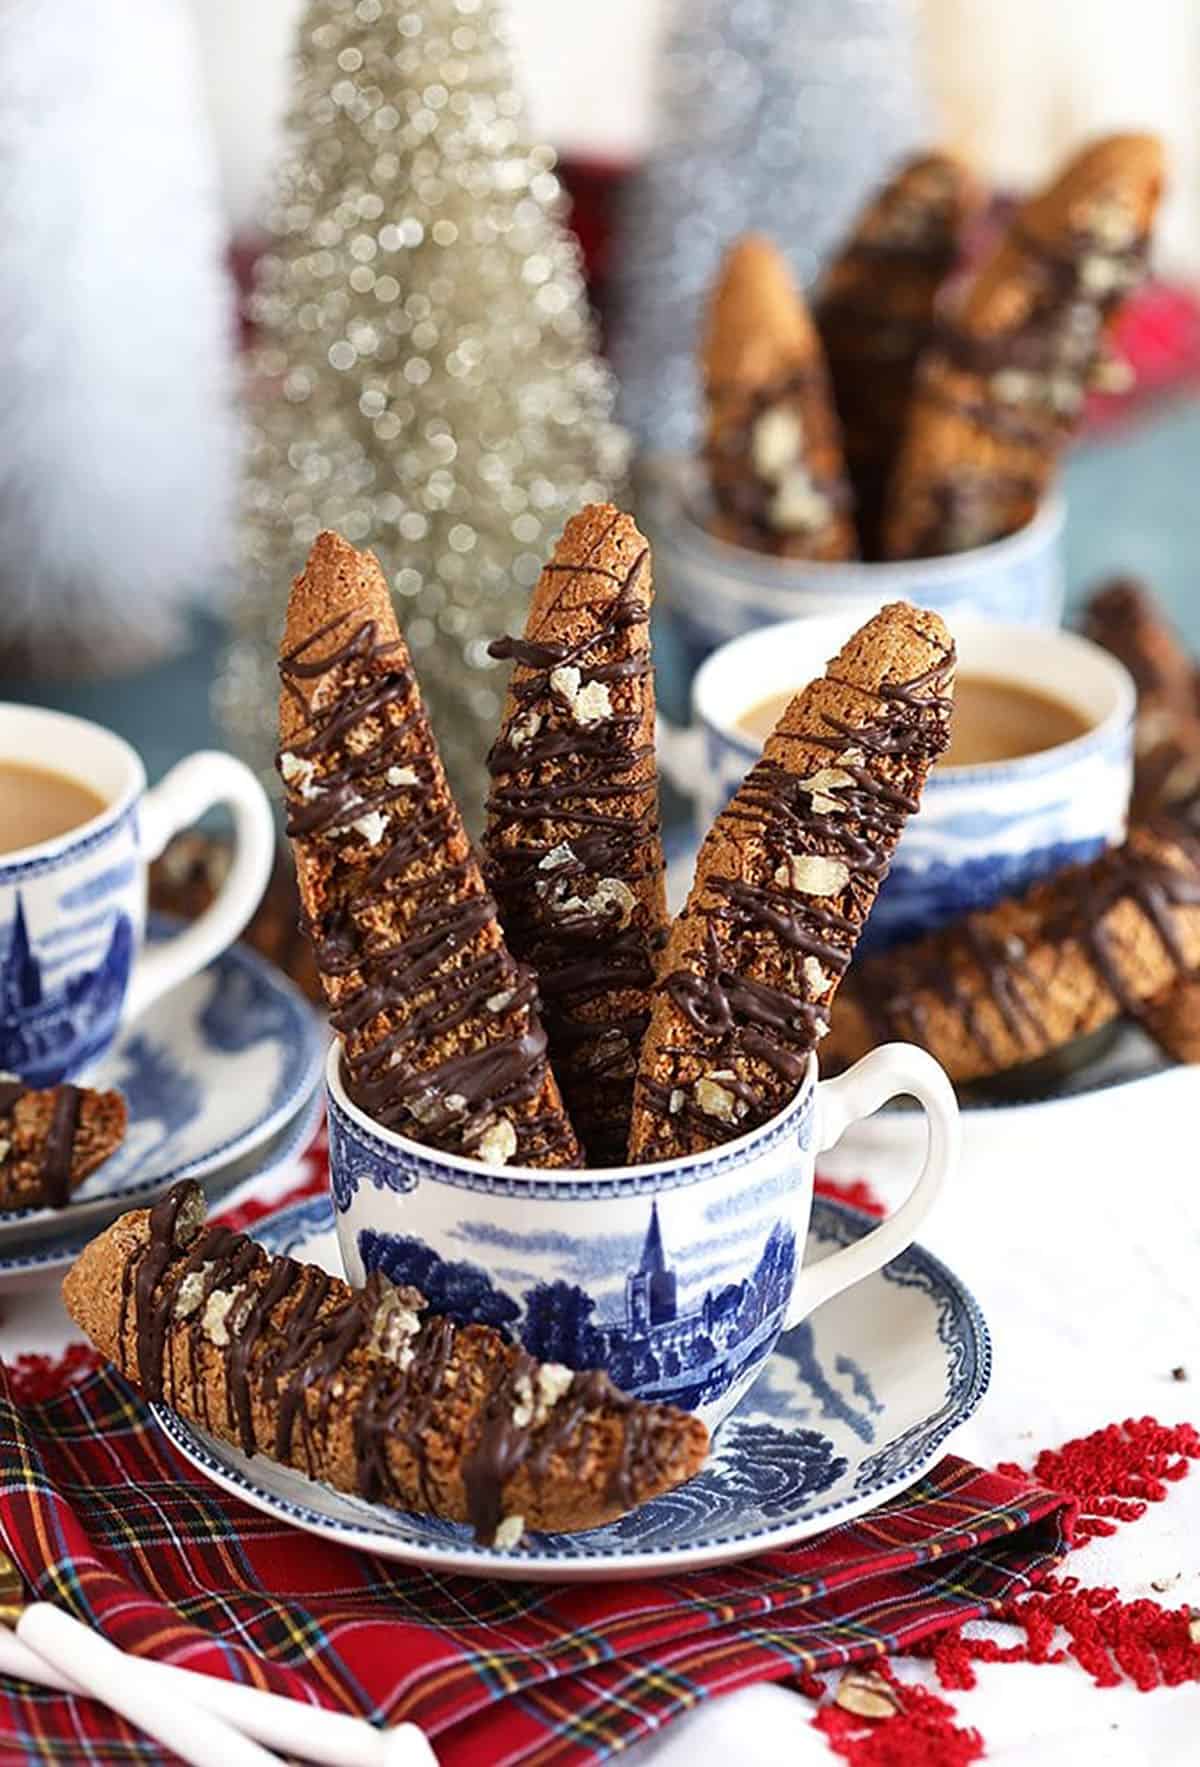 Gingerbread Biscotti with chocolate and crystalized ginger in a blue and white mug on a red plaid napkin.